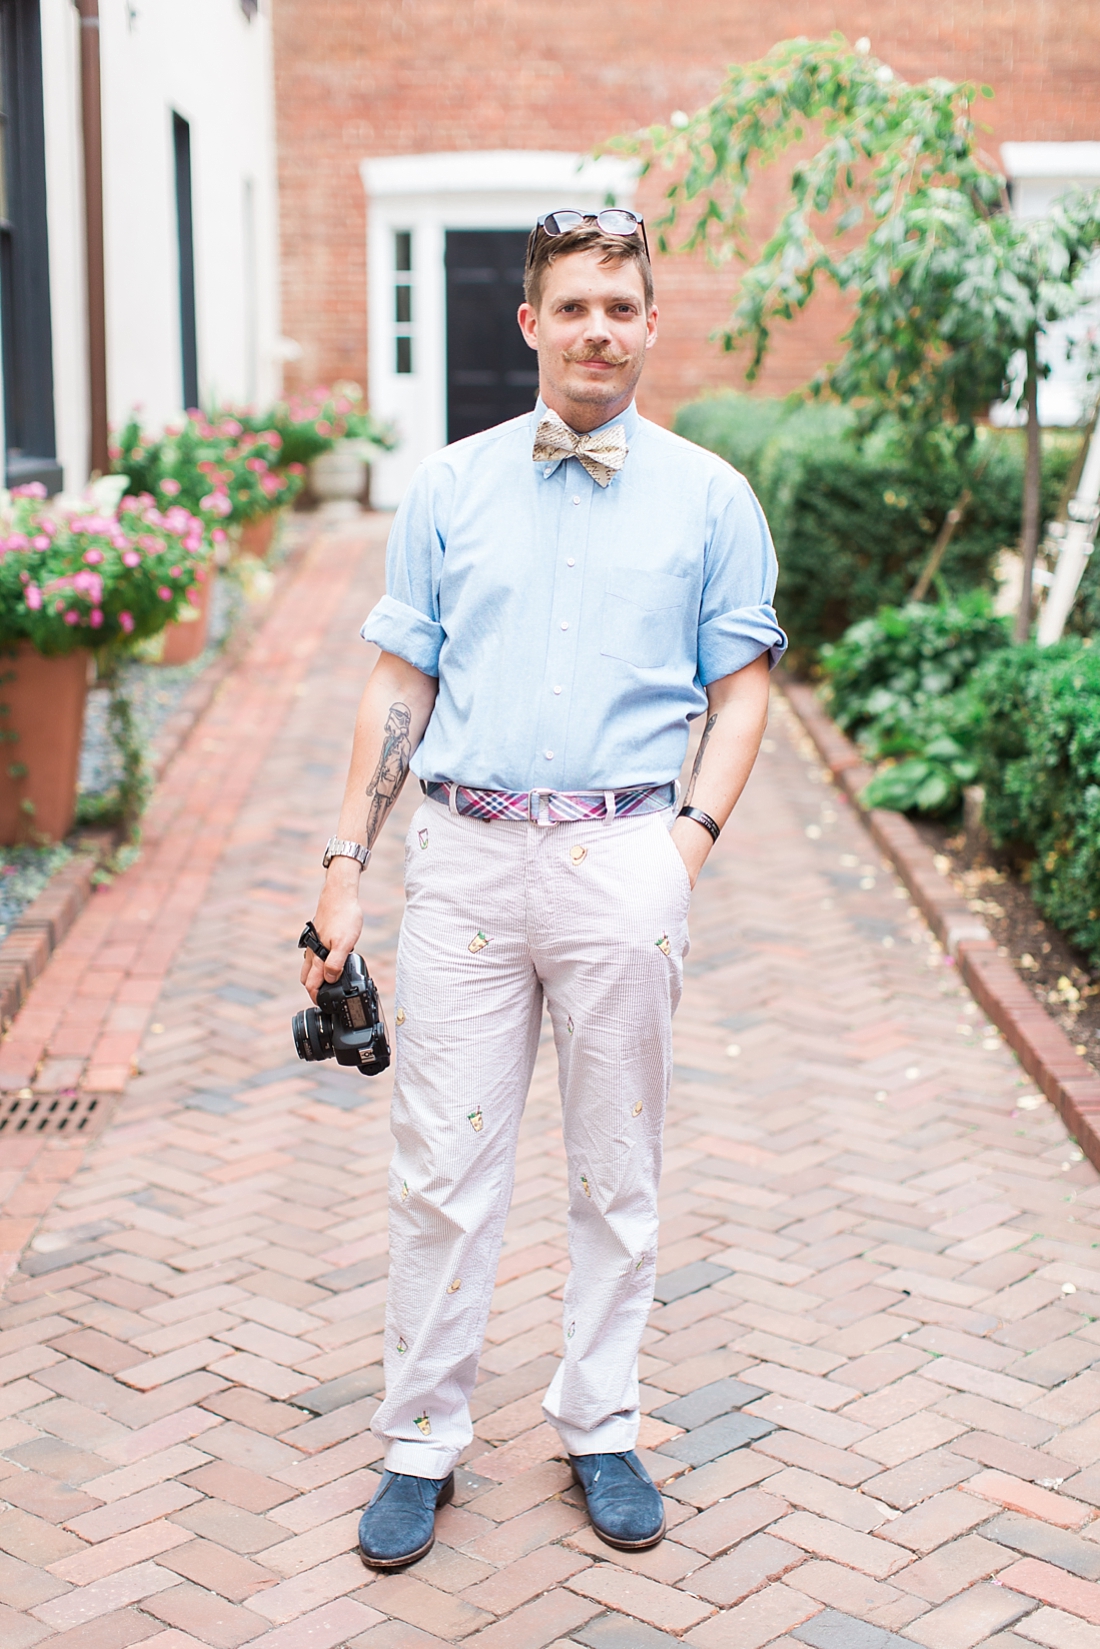 Ethan's Pants | Outfit inspiration for male photographers and wedding guests | Abby Grace